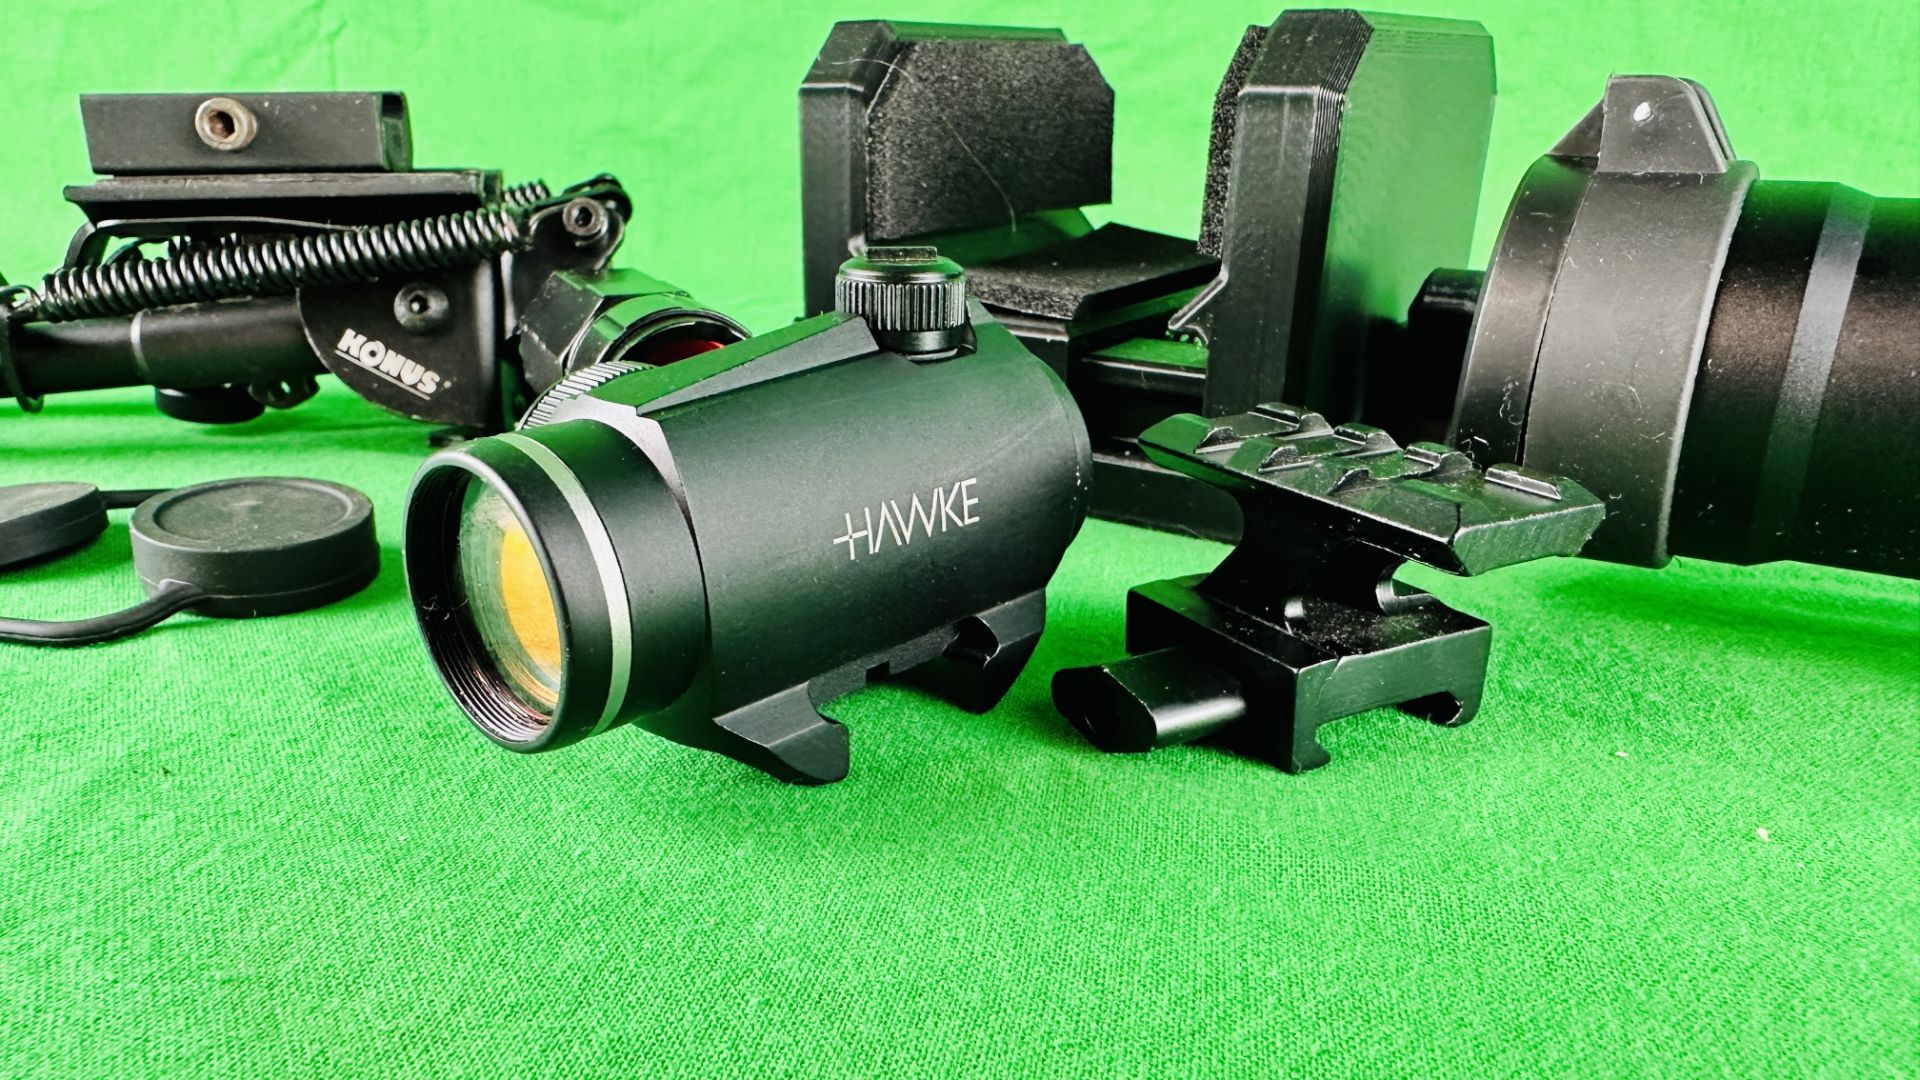 2X40RD, RED DOT SCOPE, BI-POD, VAST FIRE RED LIGHT TORCH, HAWKE RED DOT SCOPE AND RIFLE HOLDER. - Image 3 of 7